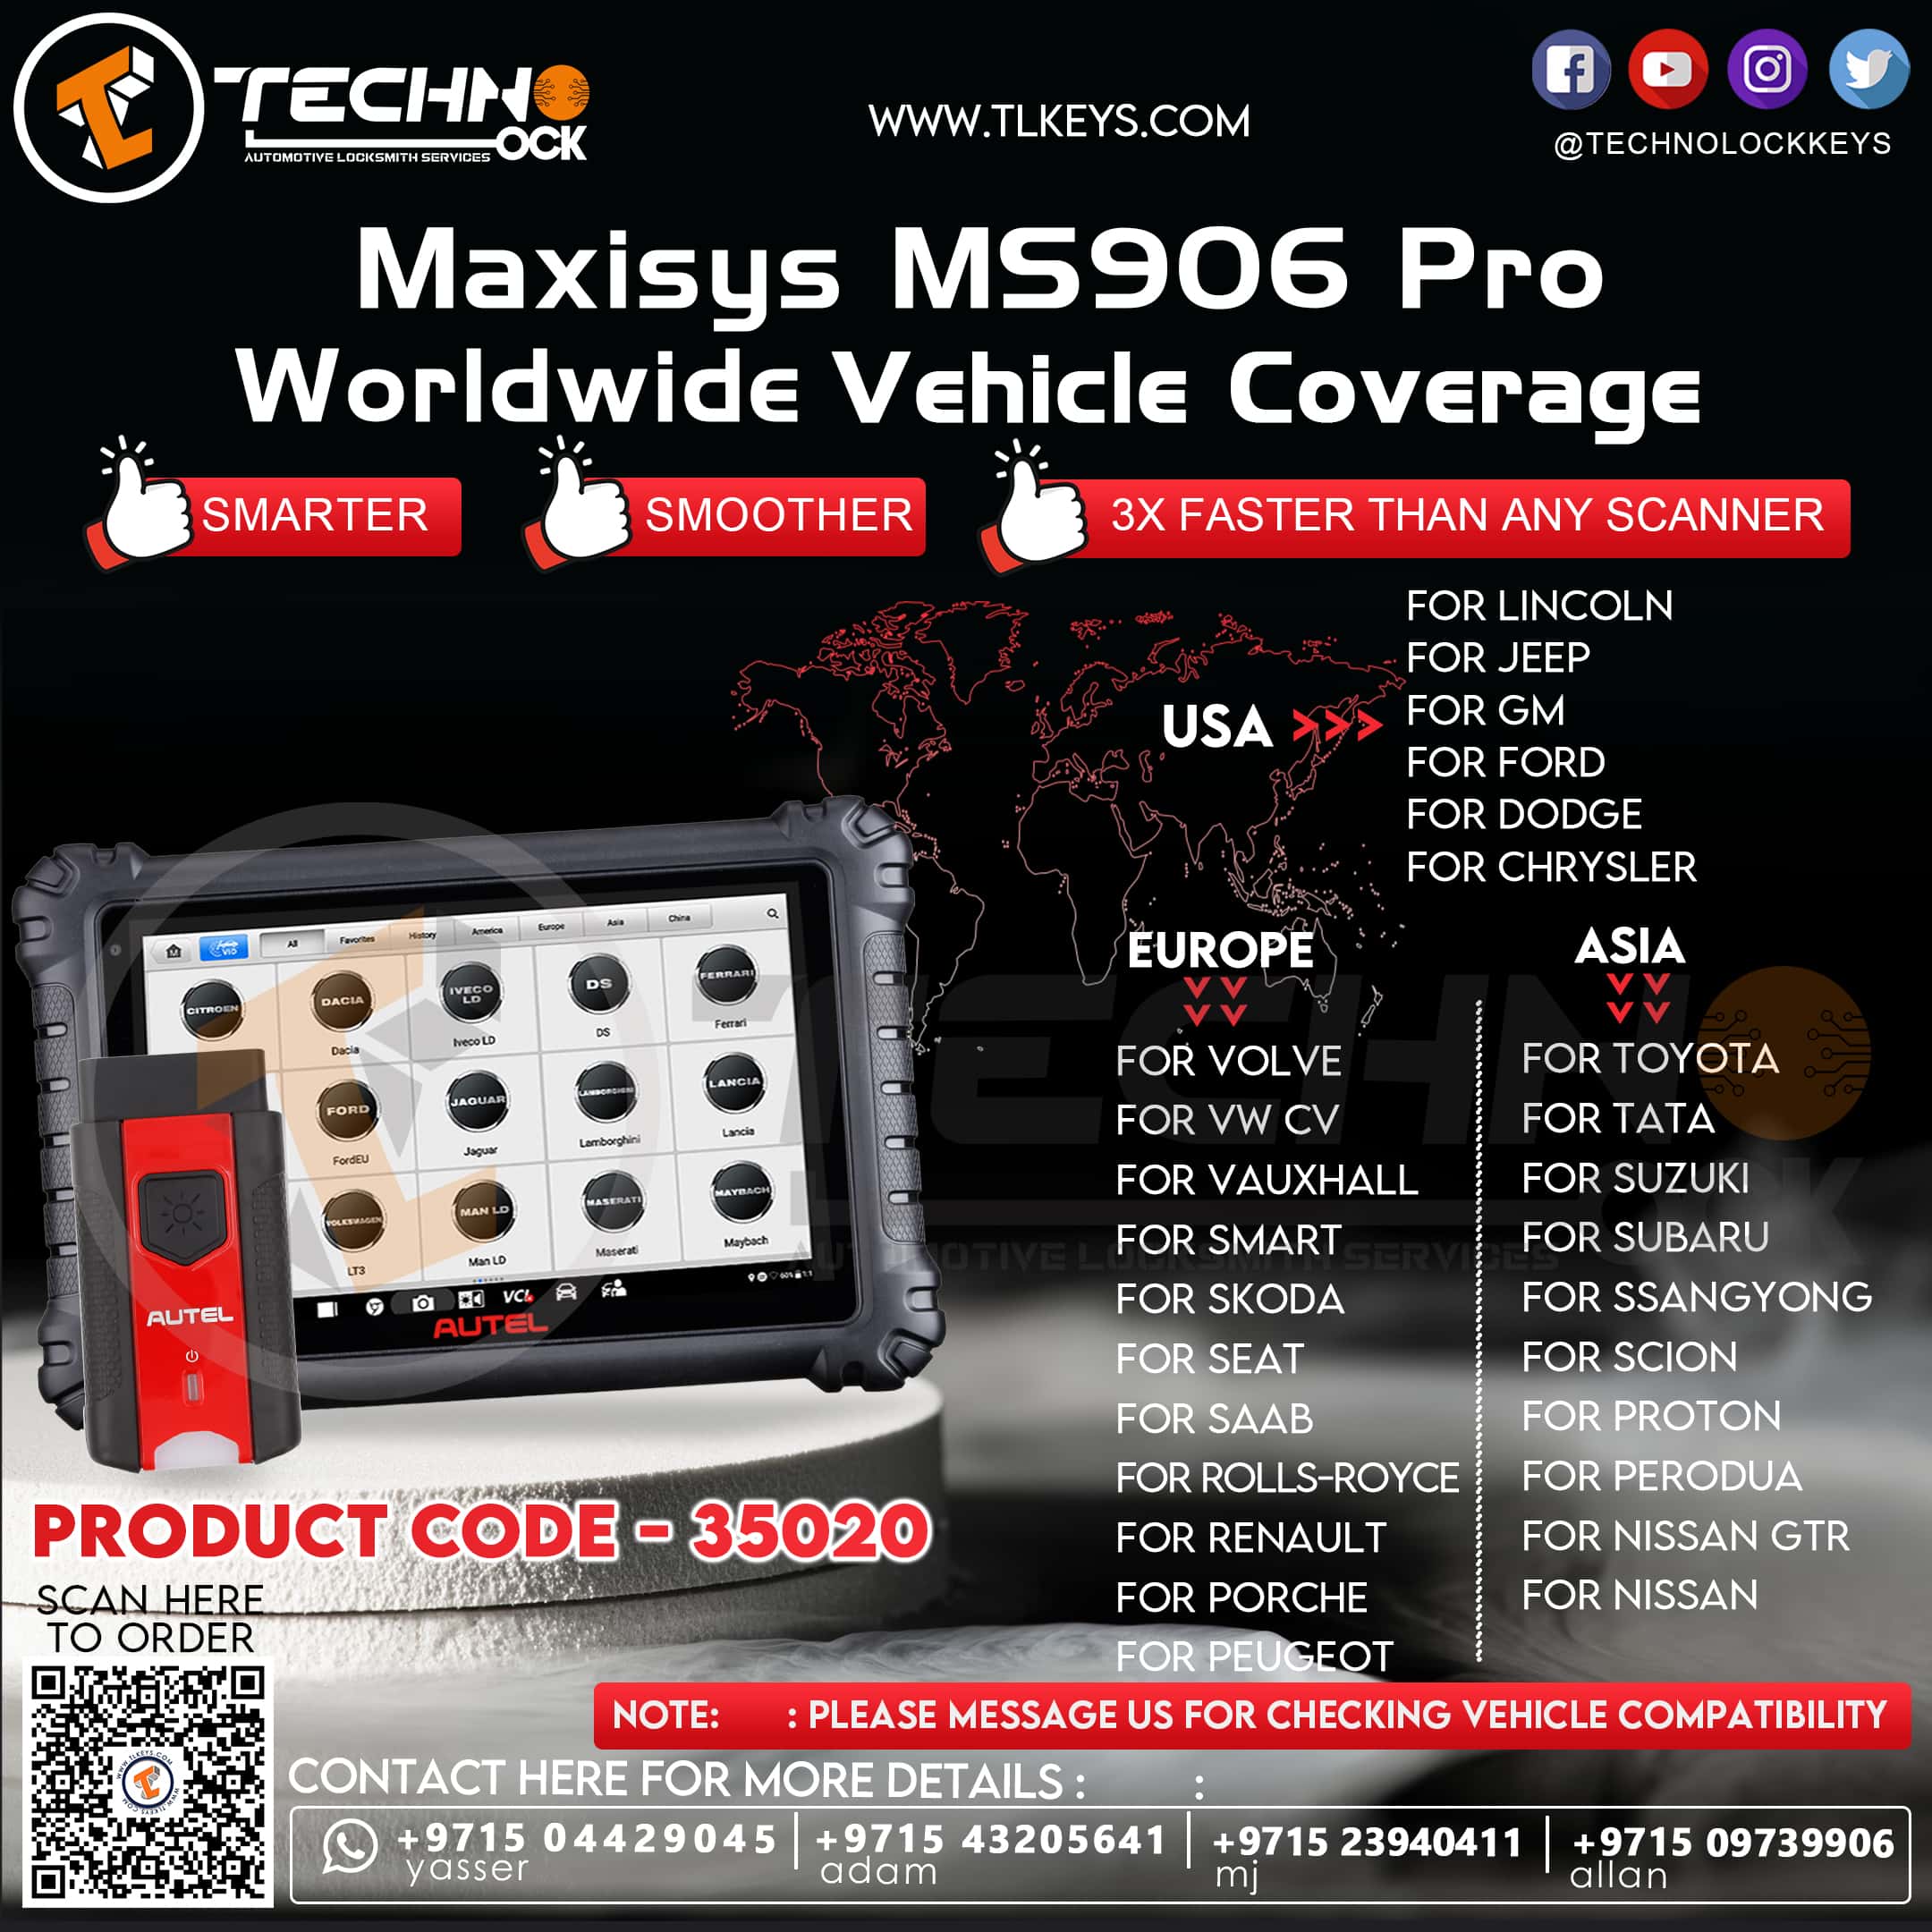 MaxiSYS MS906 Pro Diagnostic Scanner Device